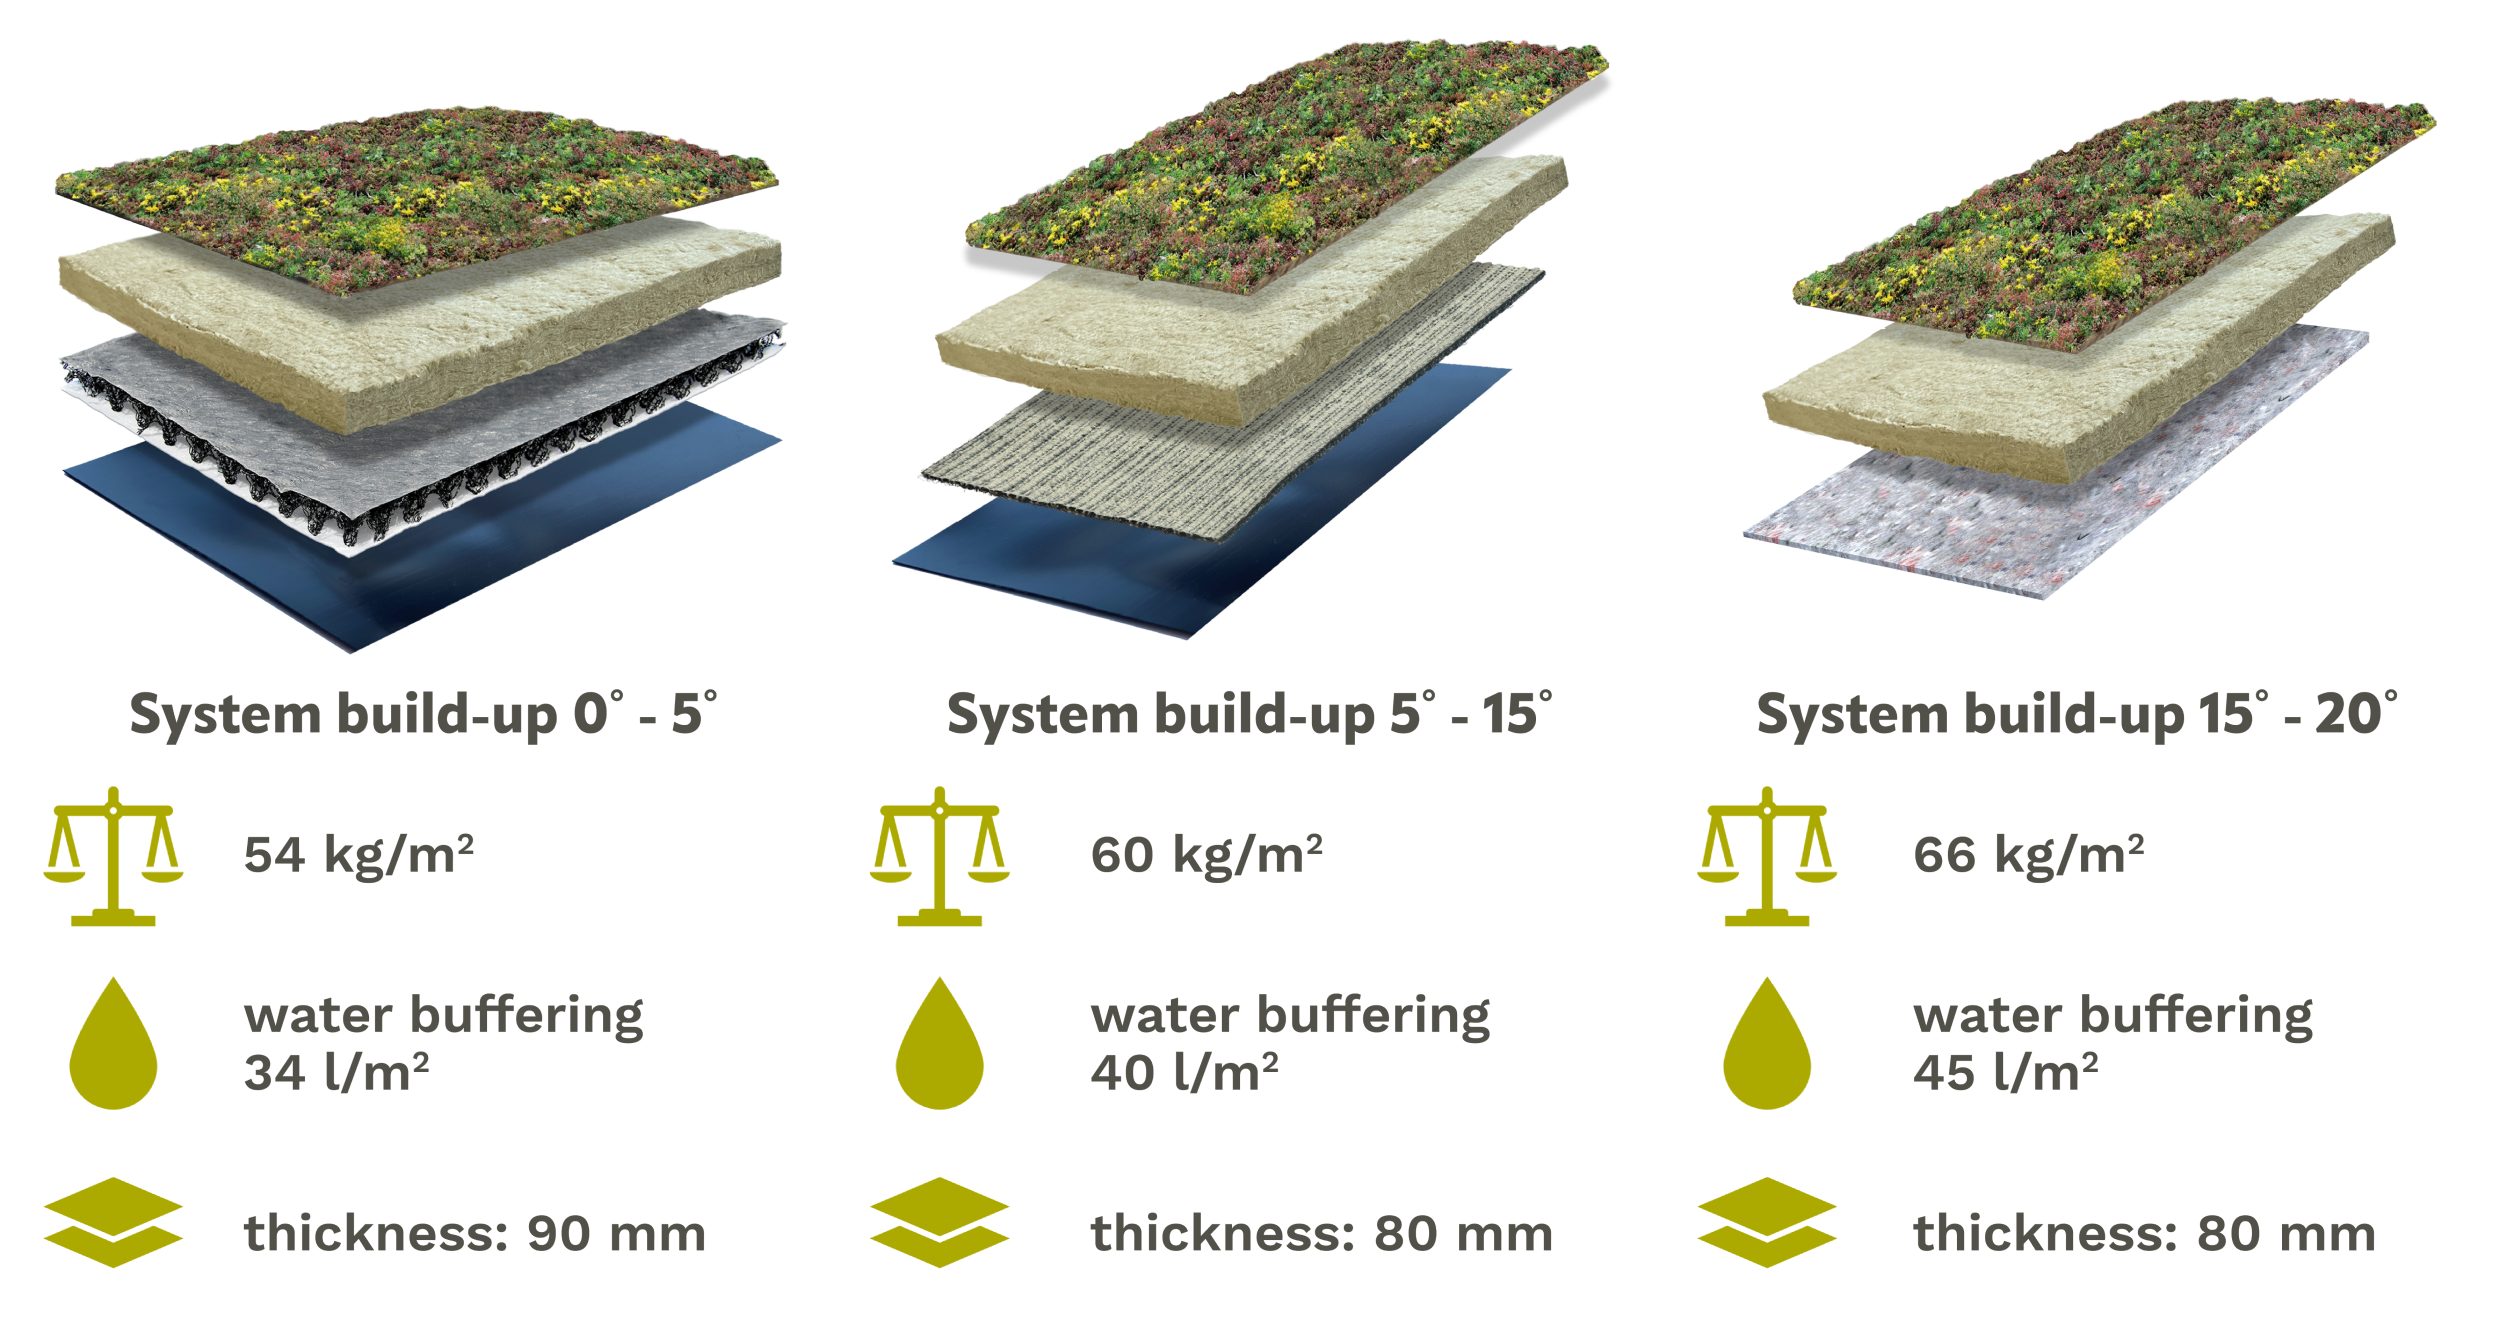 Lightweight green roof systems by Sempergreen for flat and slightly pitched roofs